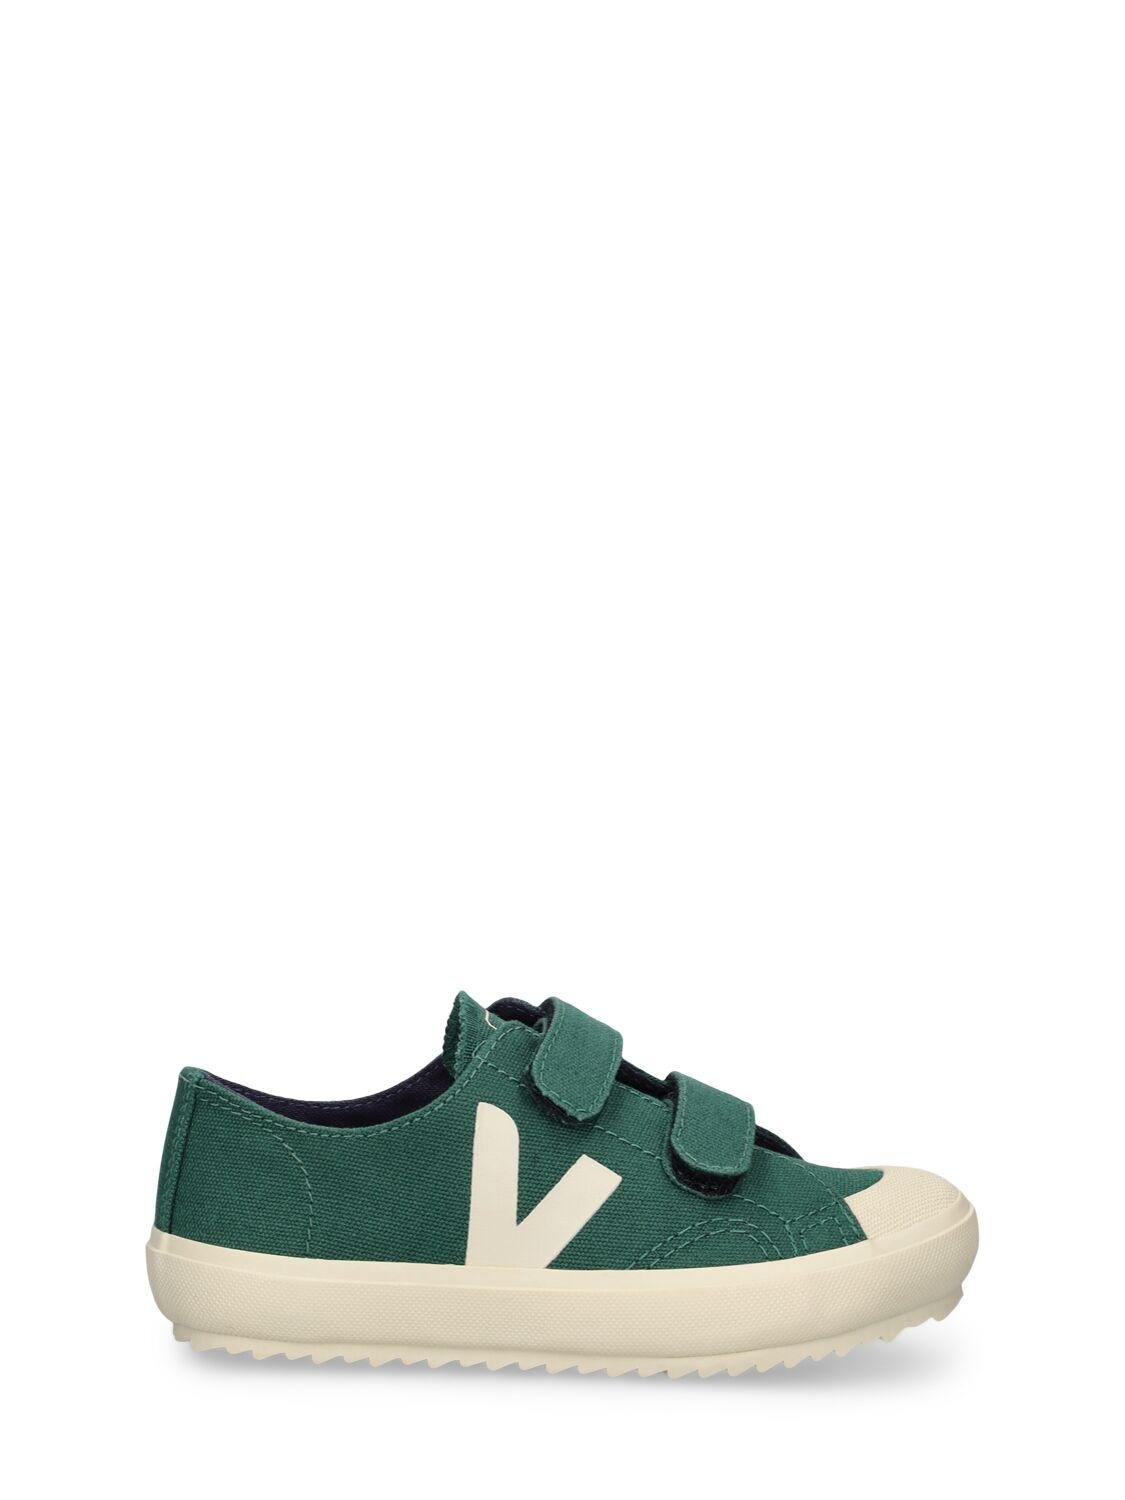 Ollie Cotton Canvas Strap Sneakers by VEJA